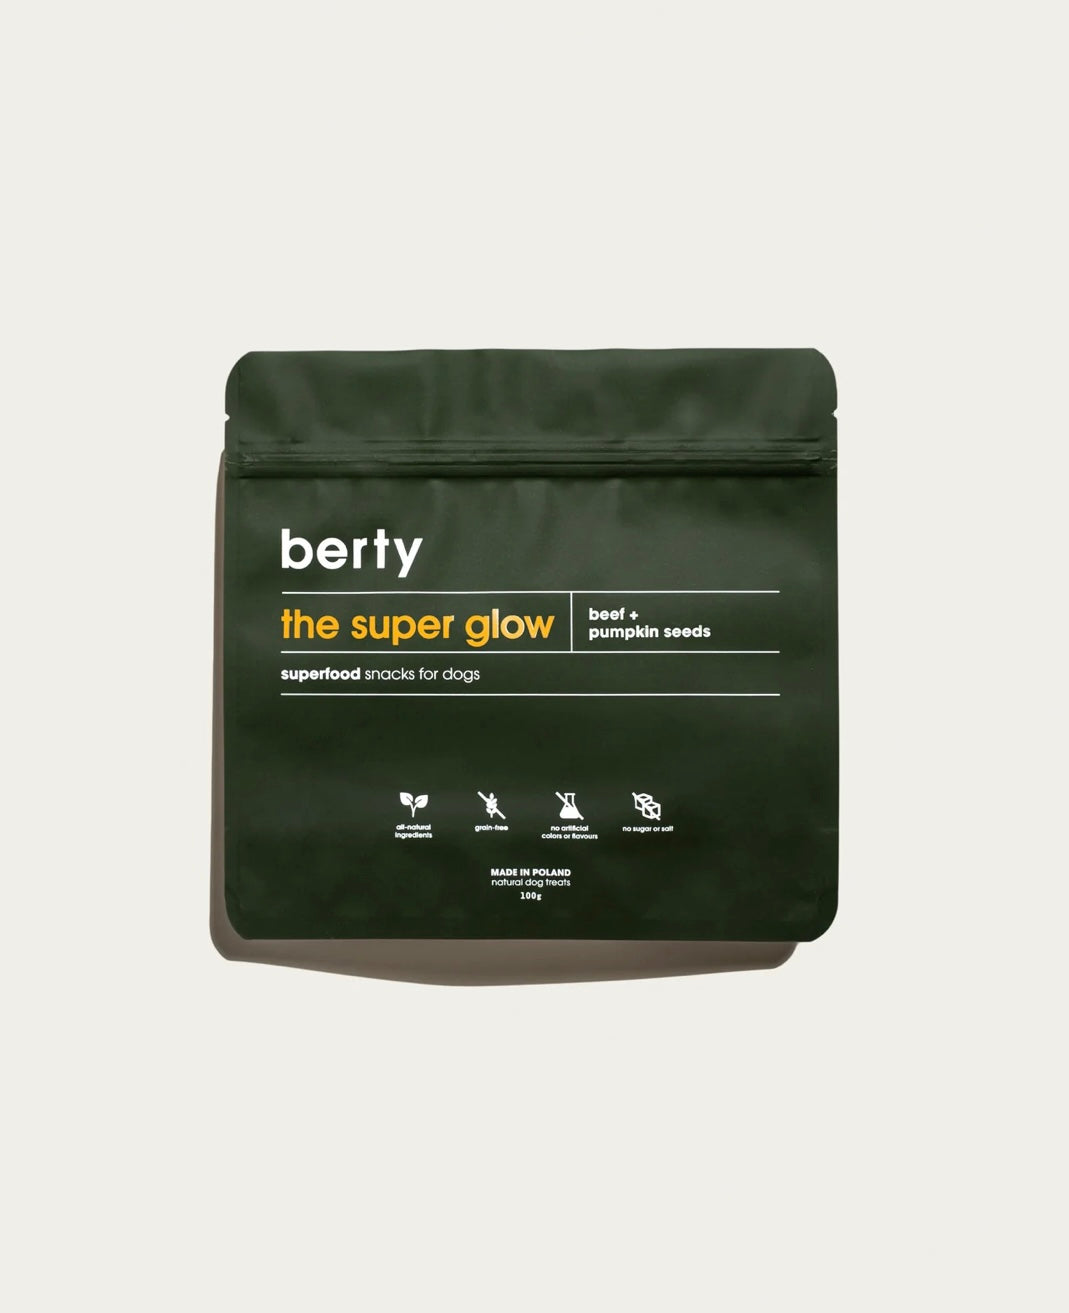 Berty super glow beef strip treats for dogs